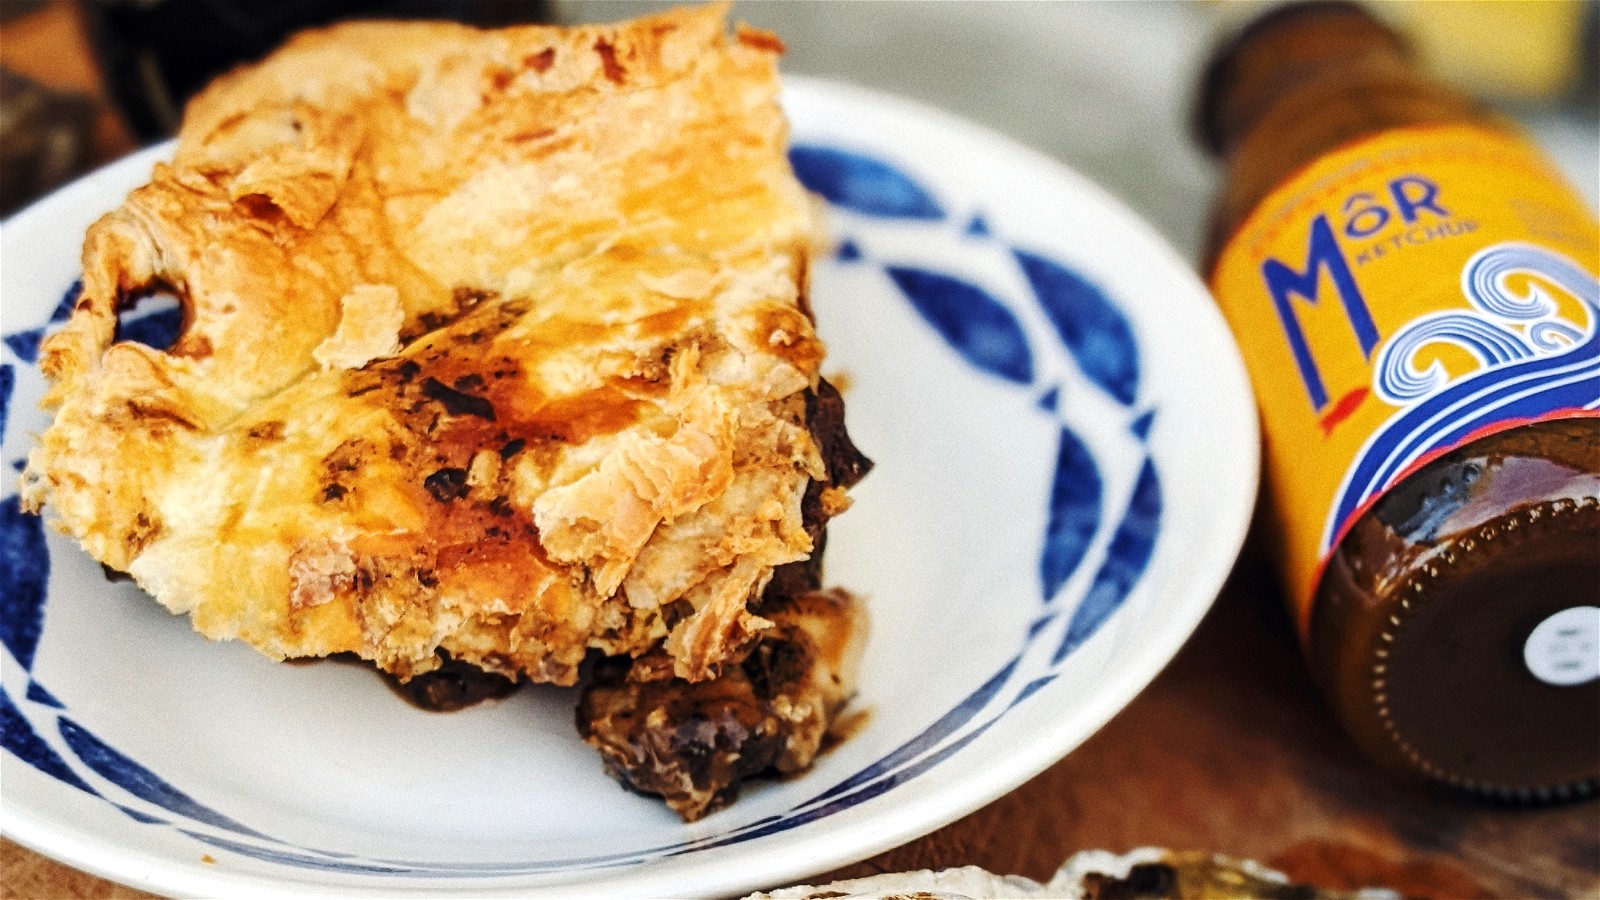 Image of Beef and Oyster Pie with laverbread, Guinness and Mor Ketchup gravy